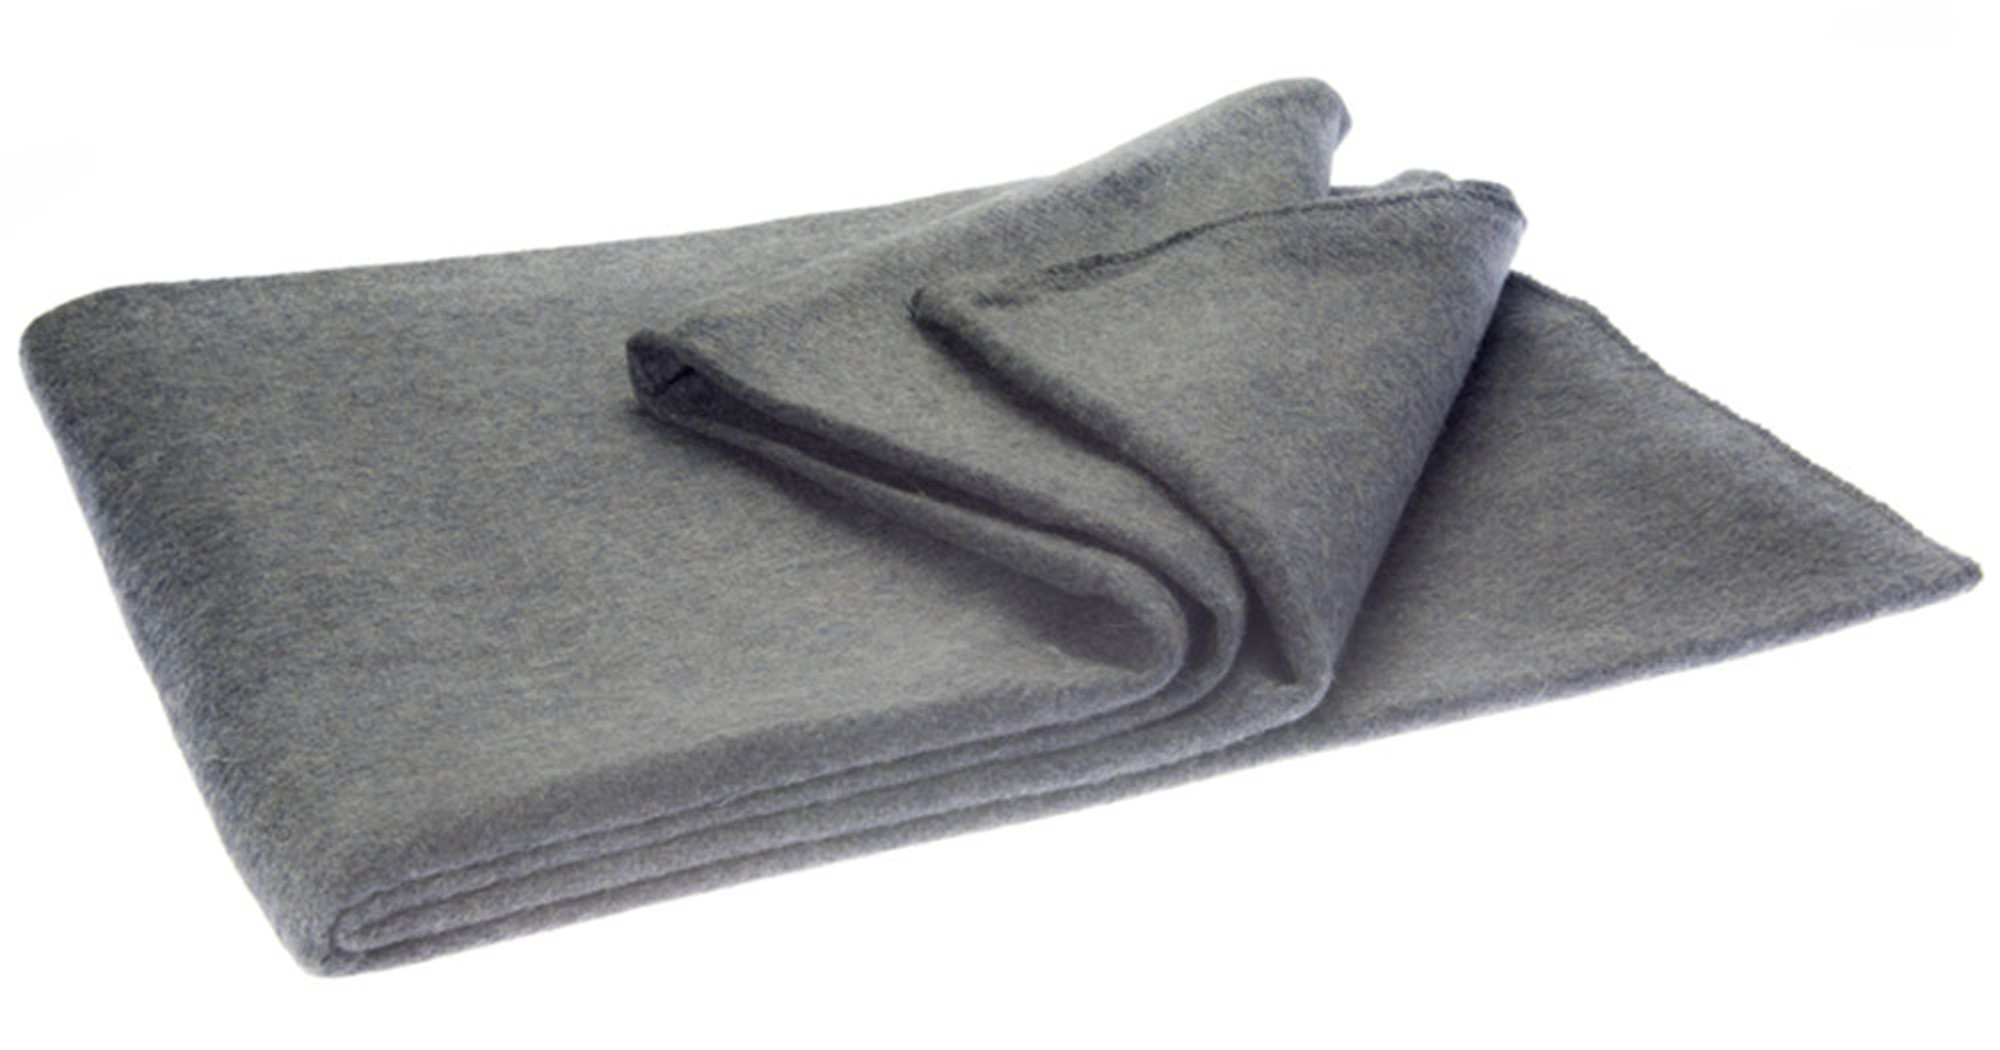 Canadian Armed Forces Issue Grey Wool Blanket - Package of 10